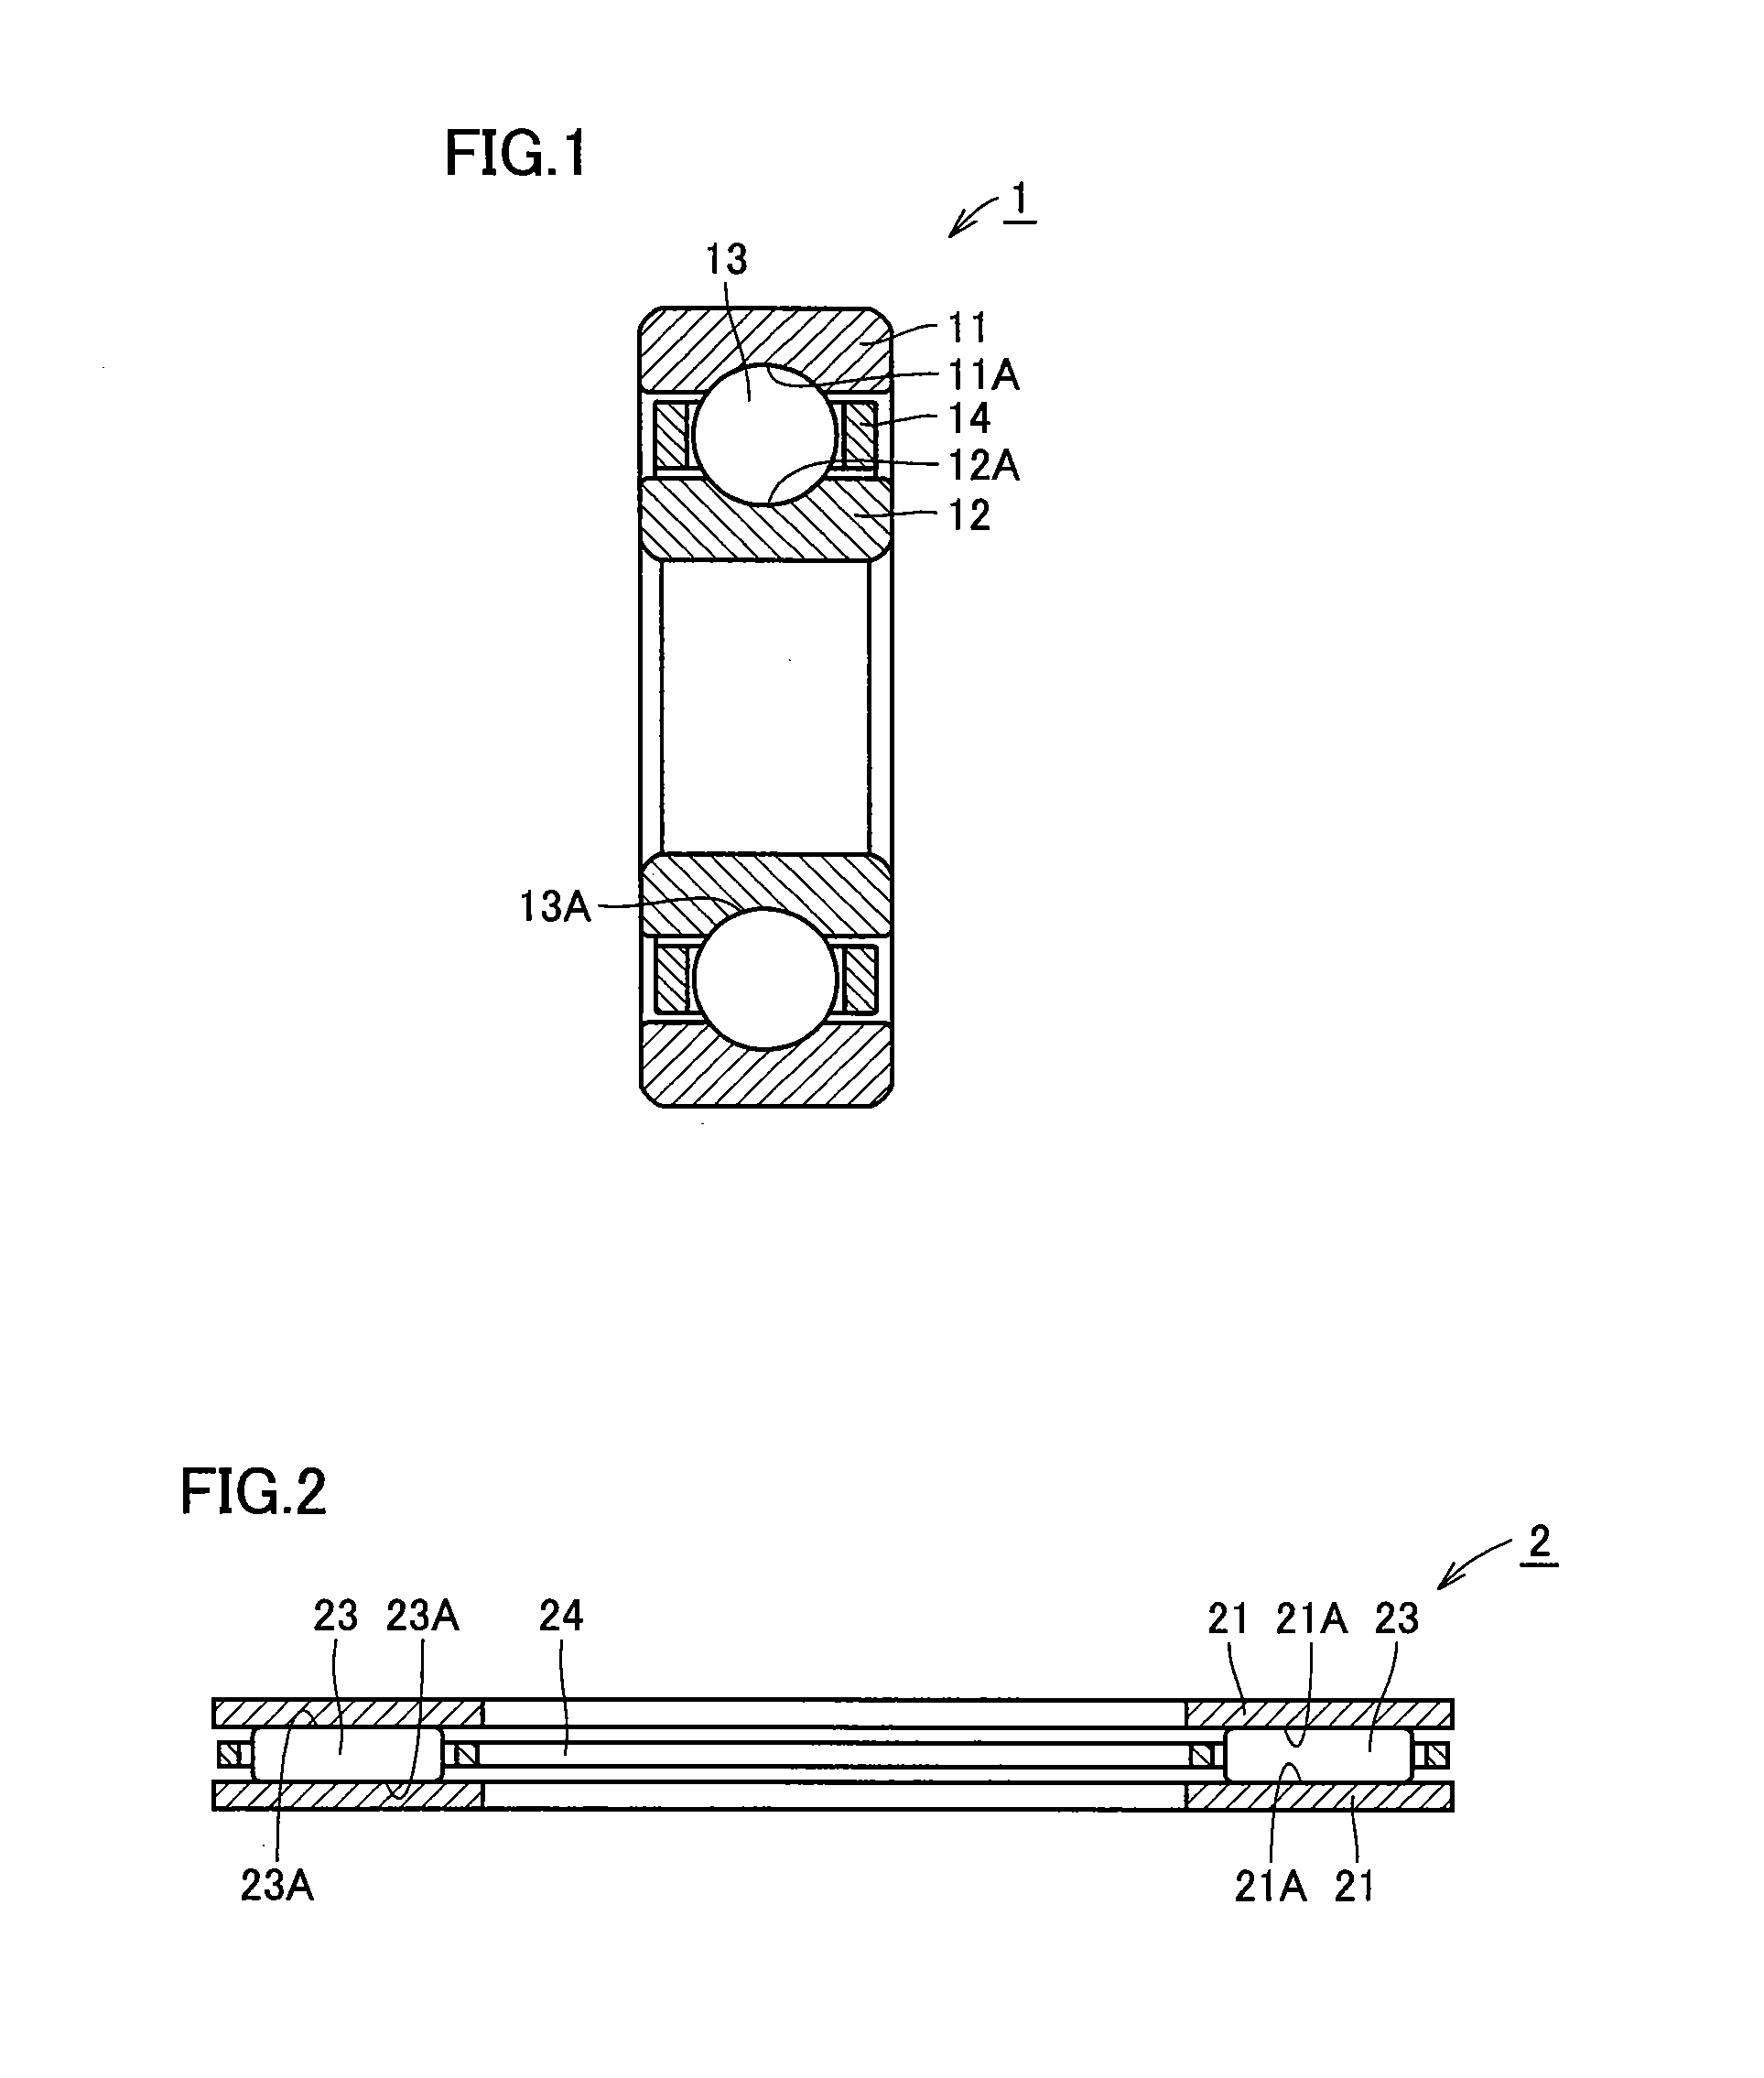 Carbonitriding method, machinery component fabrication method, and machinery component